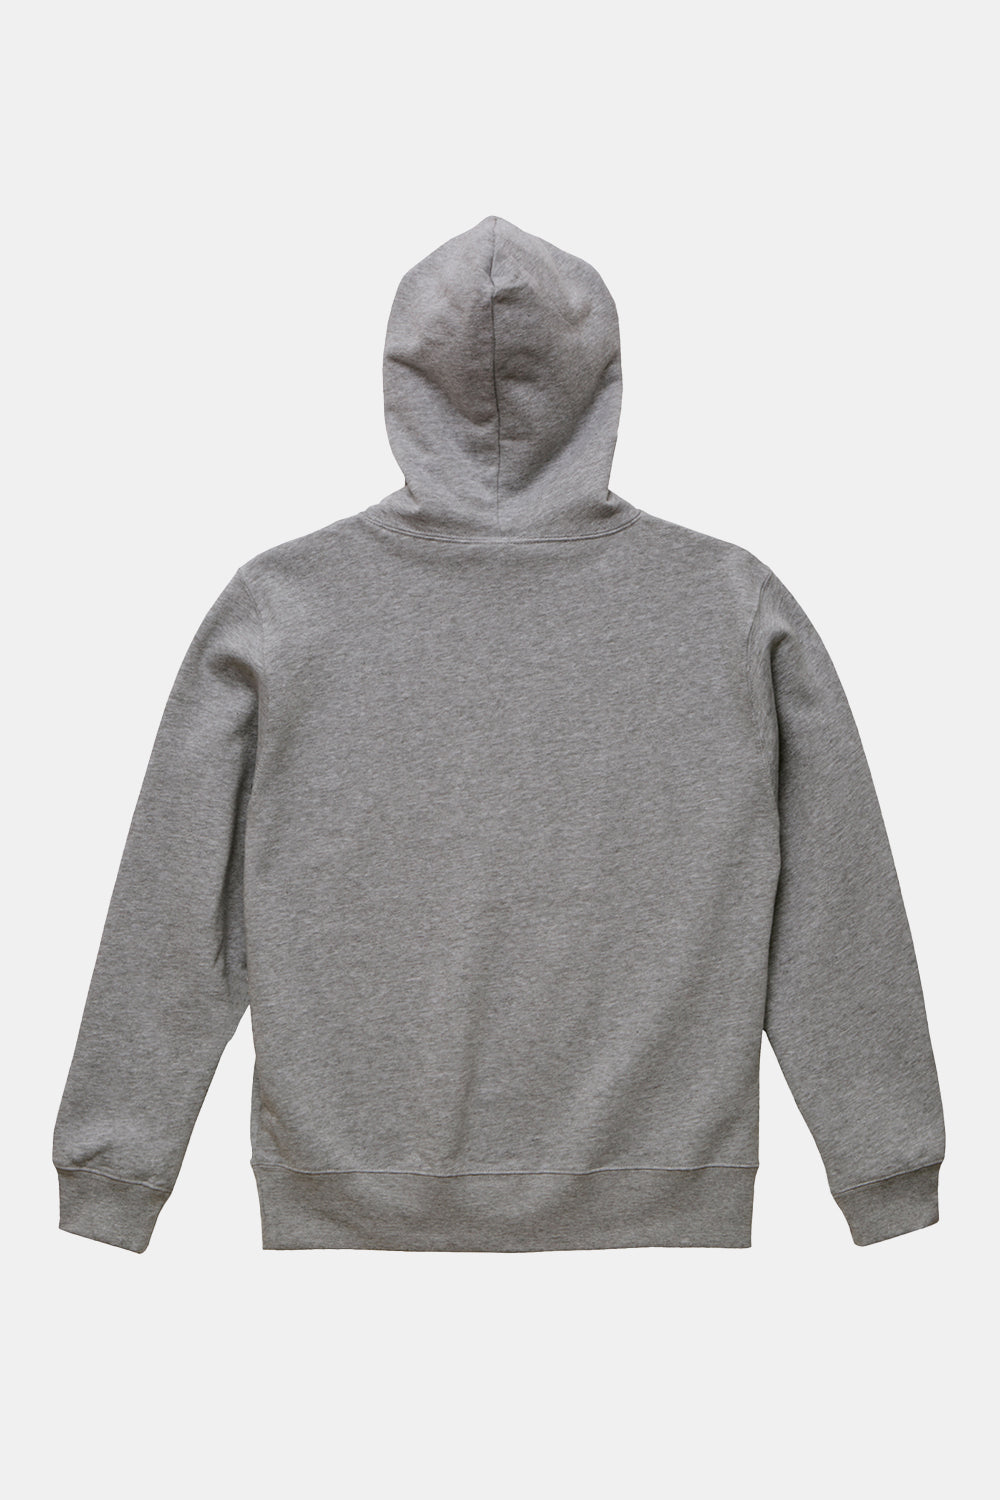 United Athle 5214 10.0oz Sweat Pullover Hoodie (Mix Grey)